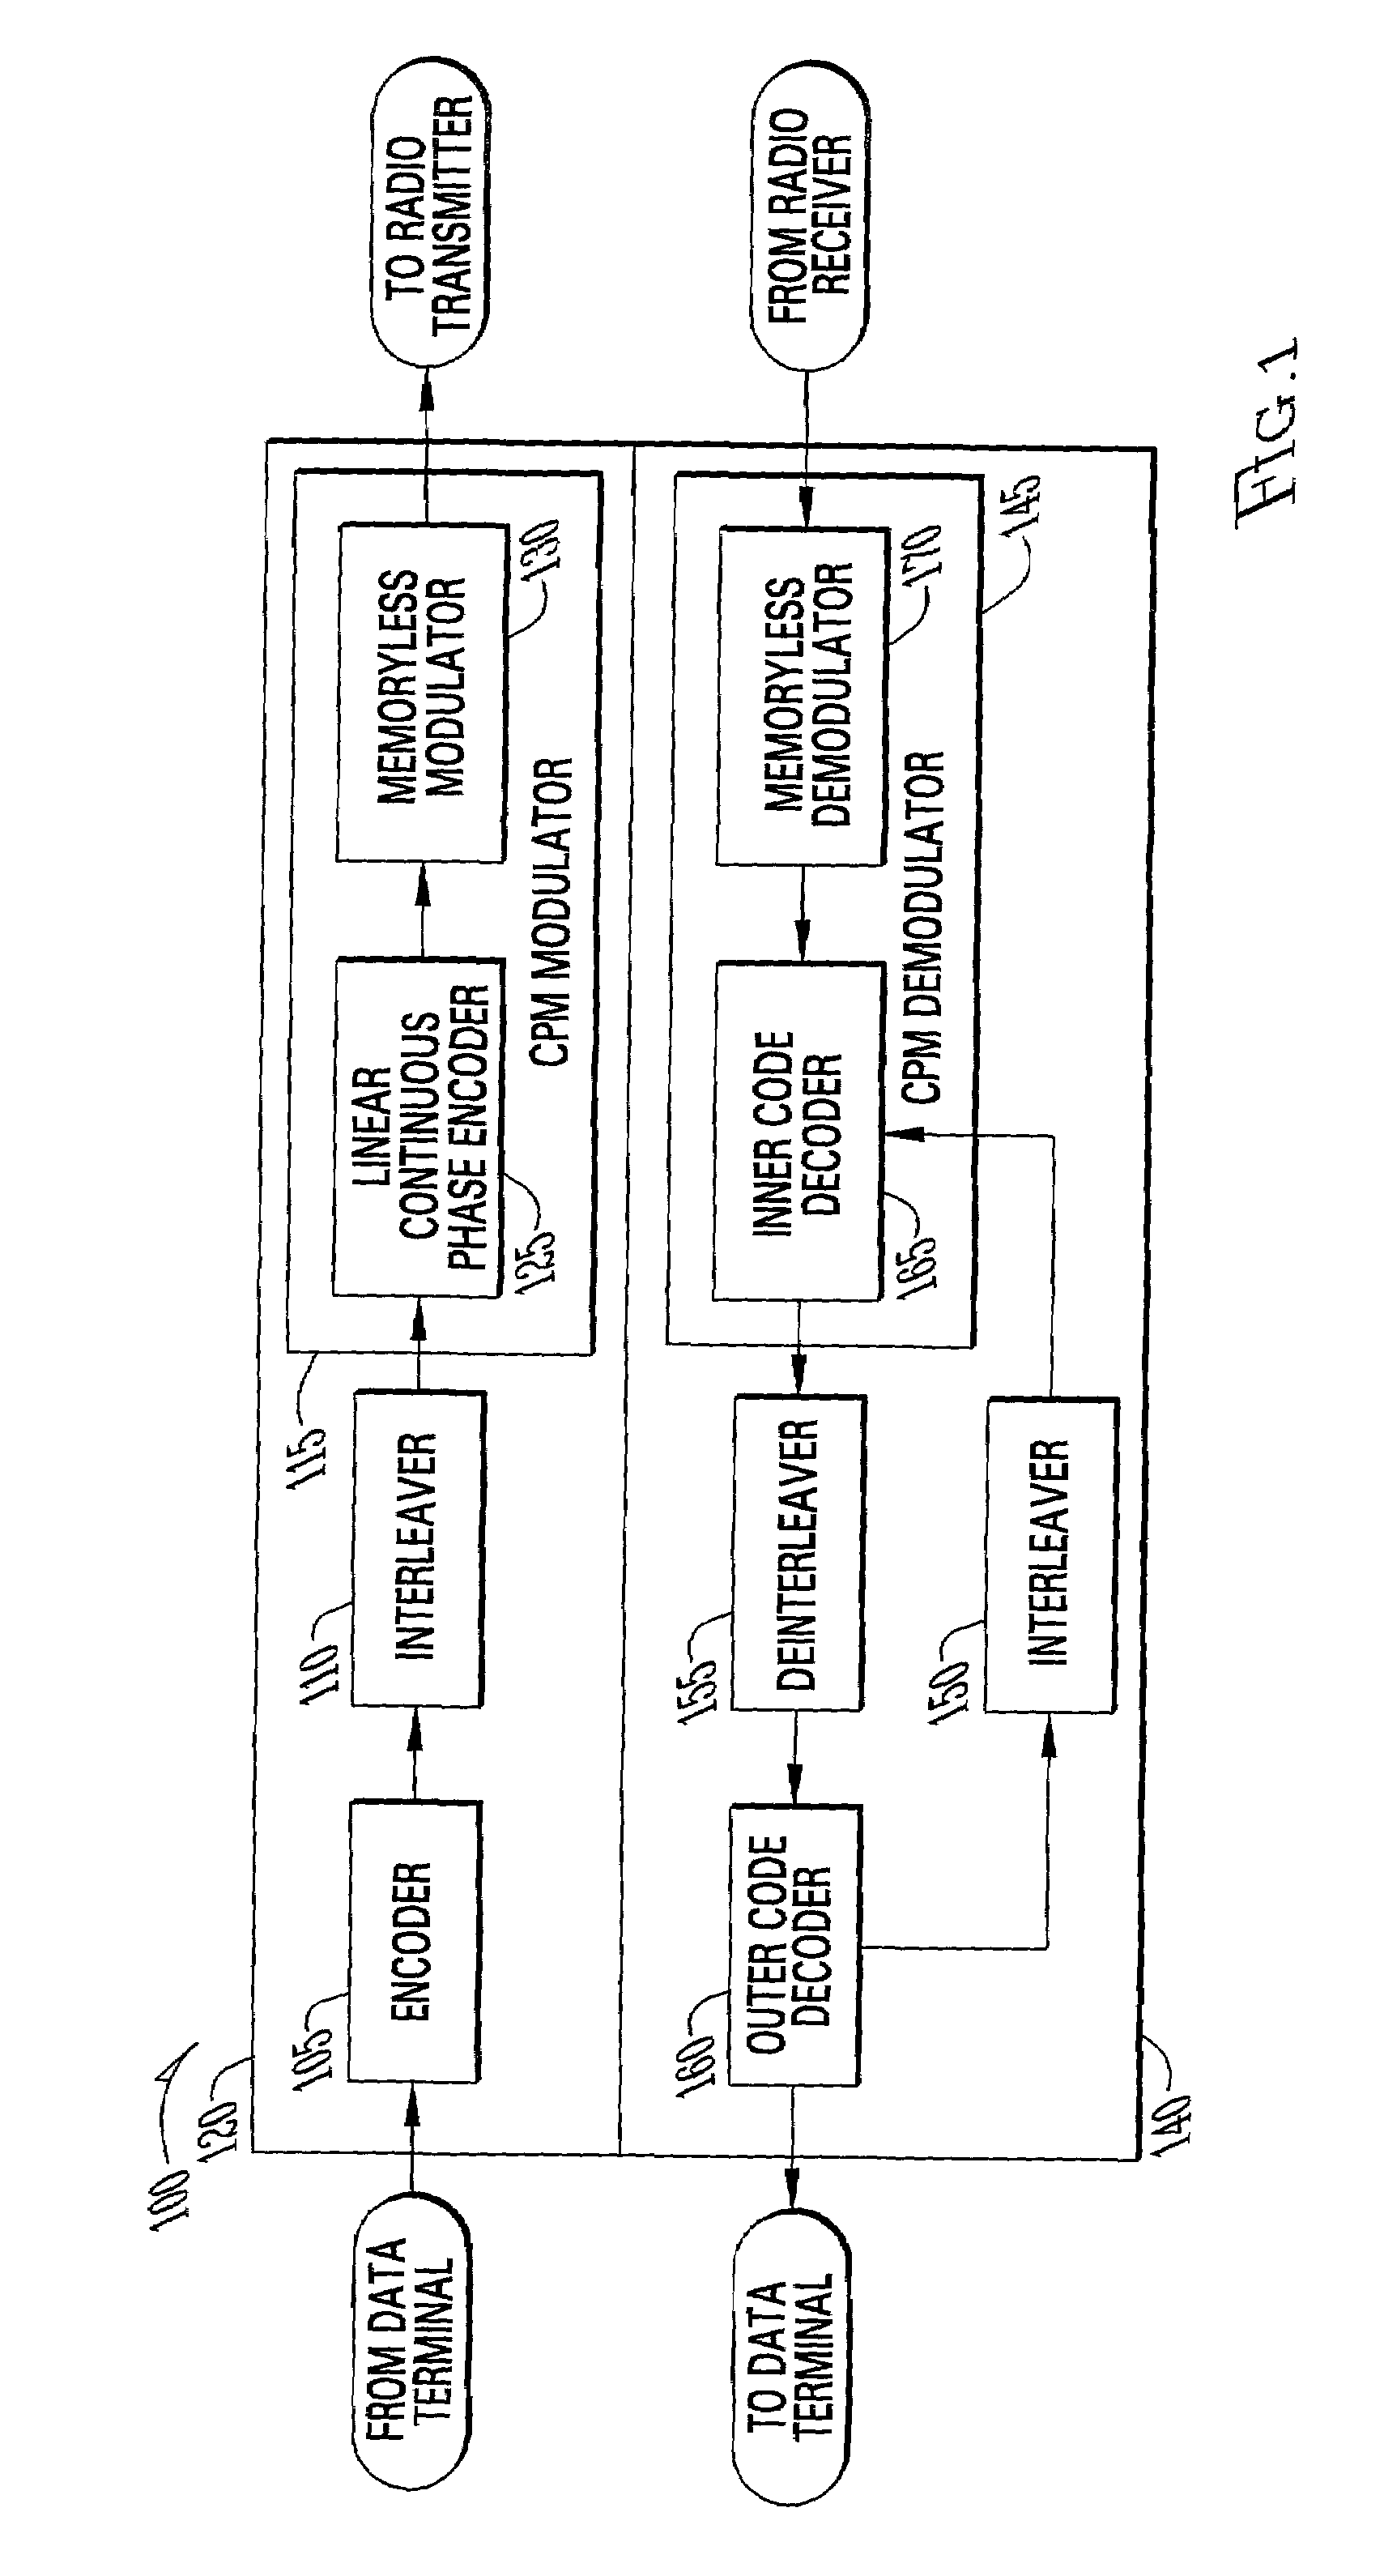 Synchronization method and apparatus for modems based on jointly iterative turbo demodulation and decoding